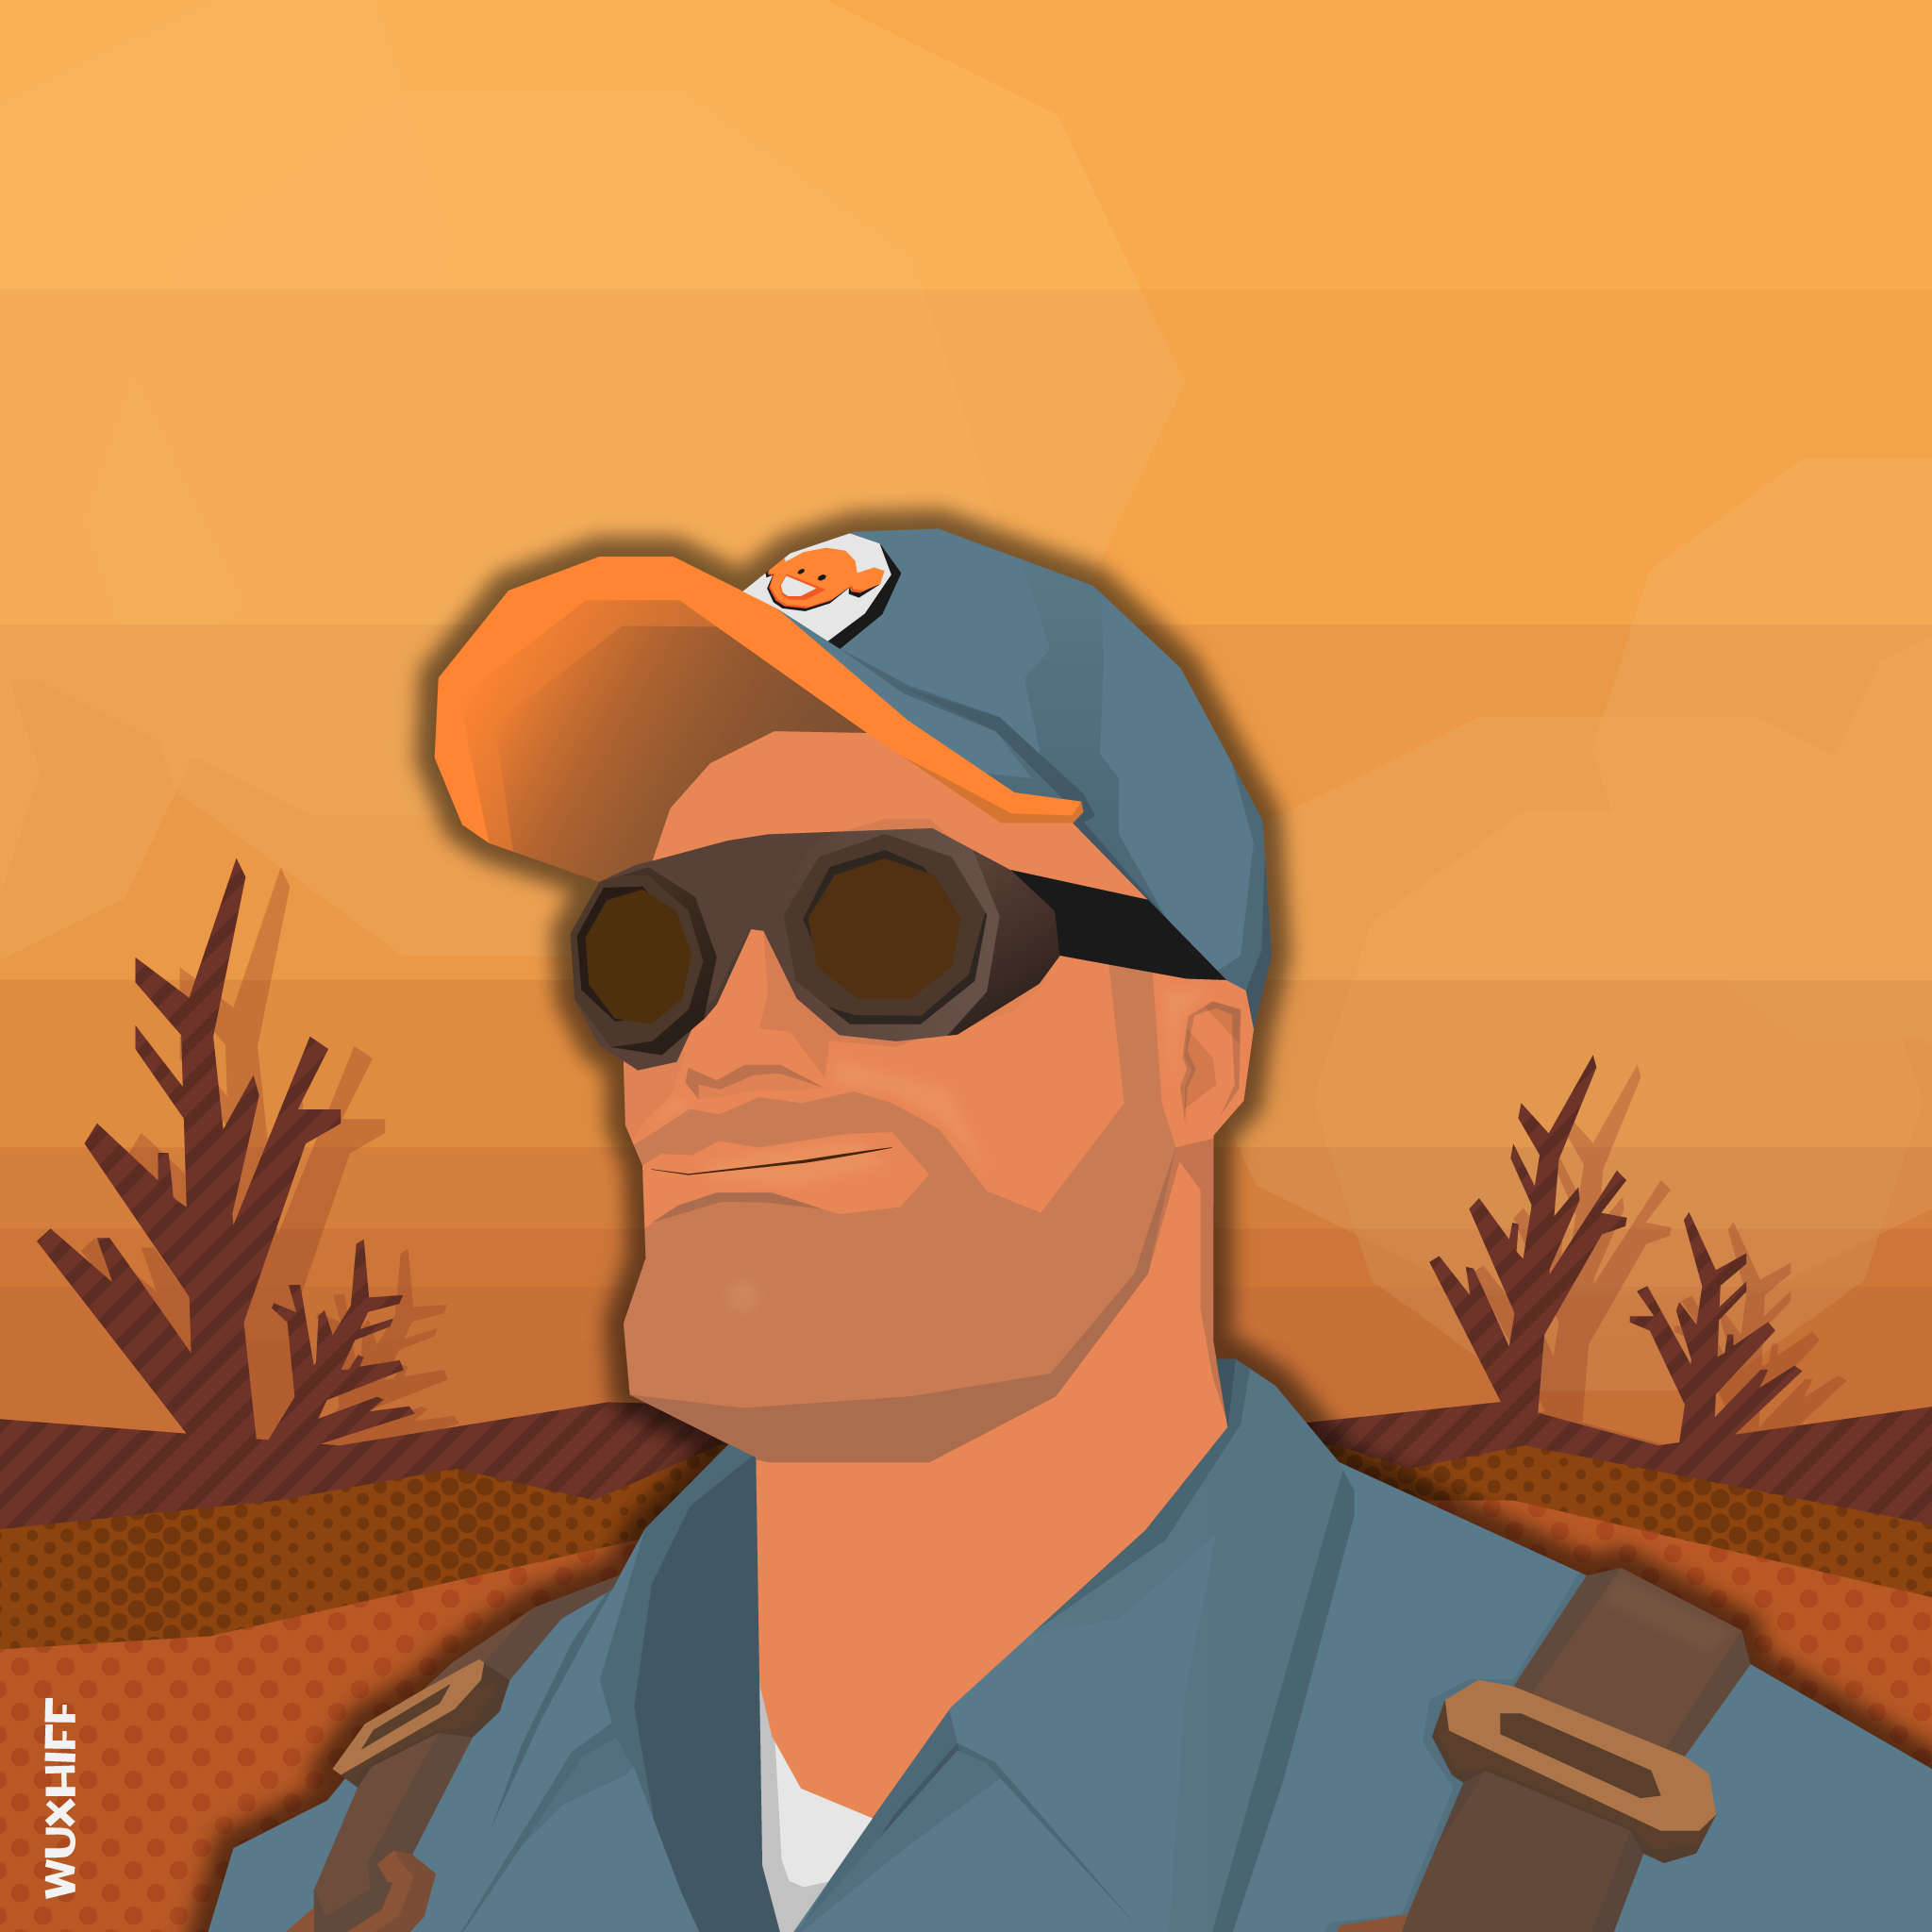 engi_autumn_72hr_without_text_blu.png